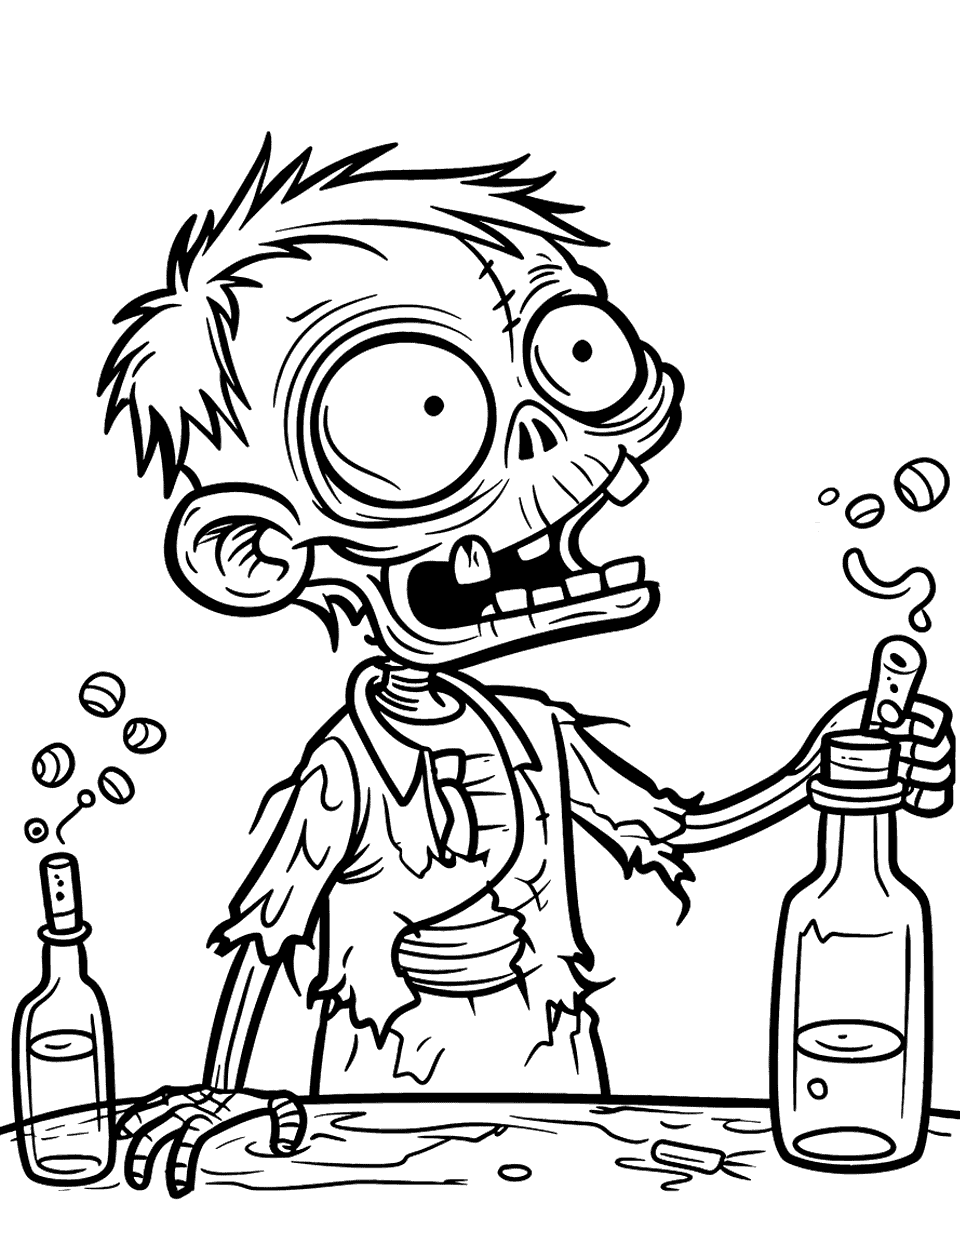 Zombie in a Lab Coloring Page - A zombie experimenting with chemicals on the lab table.